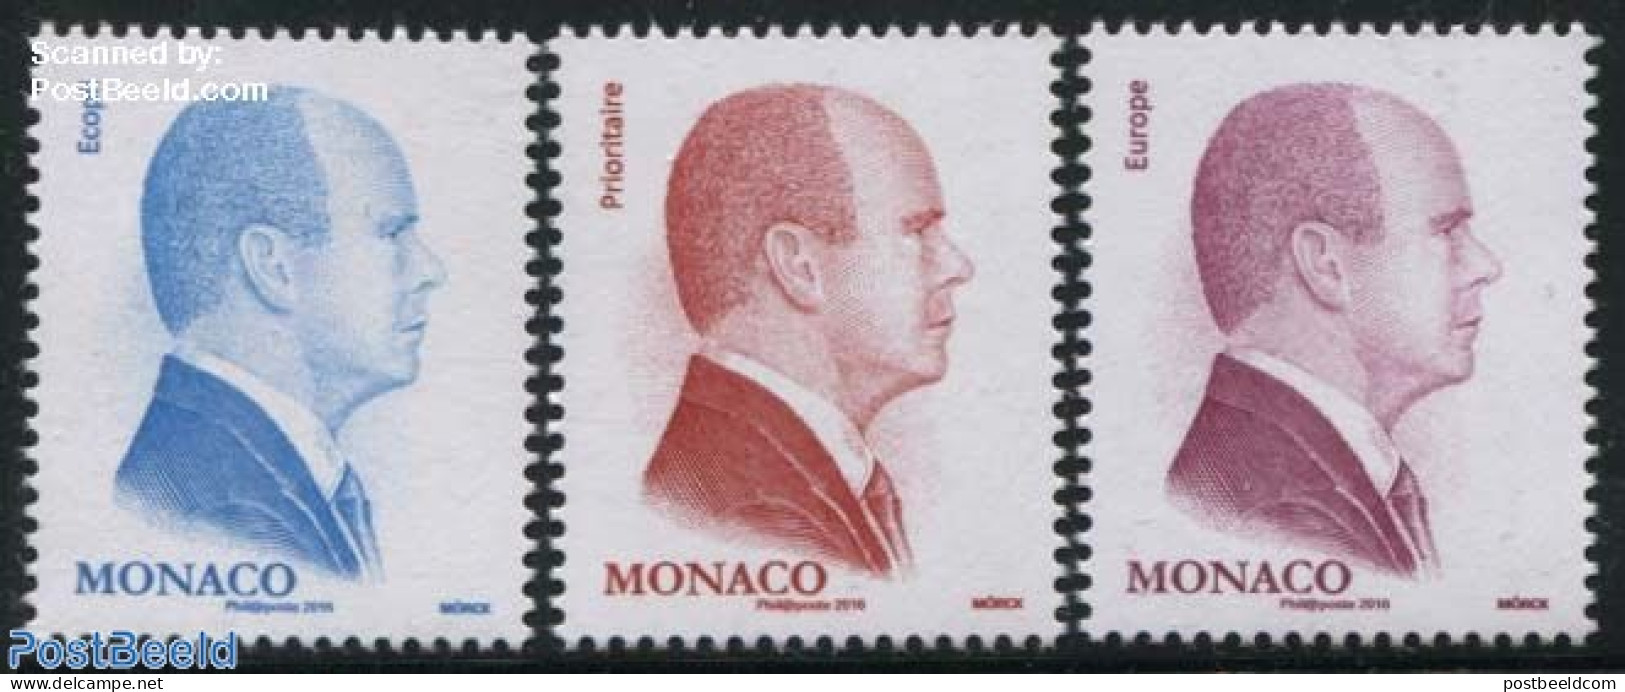 Monaco 2016 Definitives 3v (with Year 2016), Mint NH - Unused Stamps